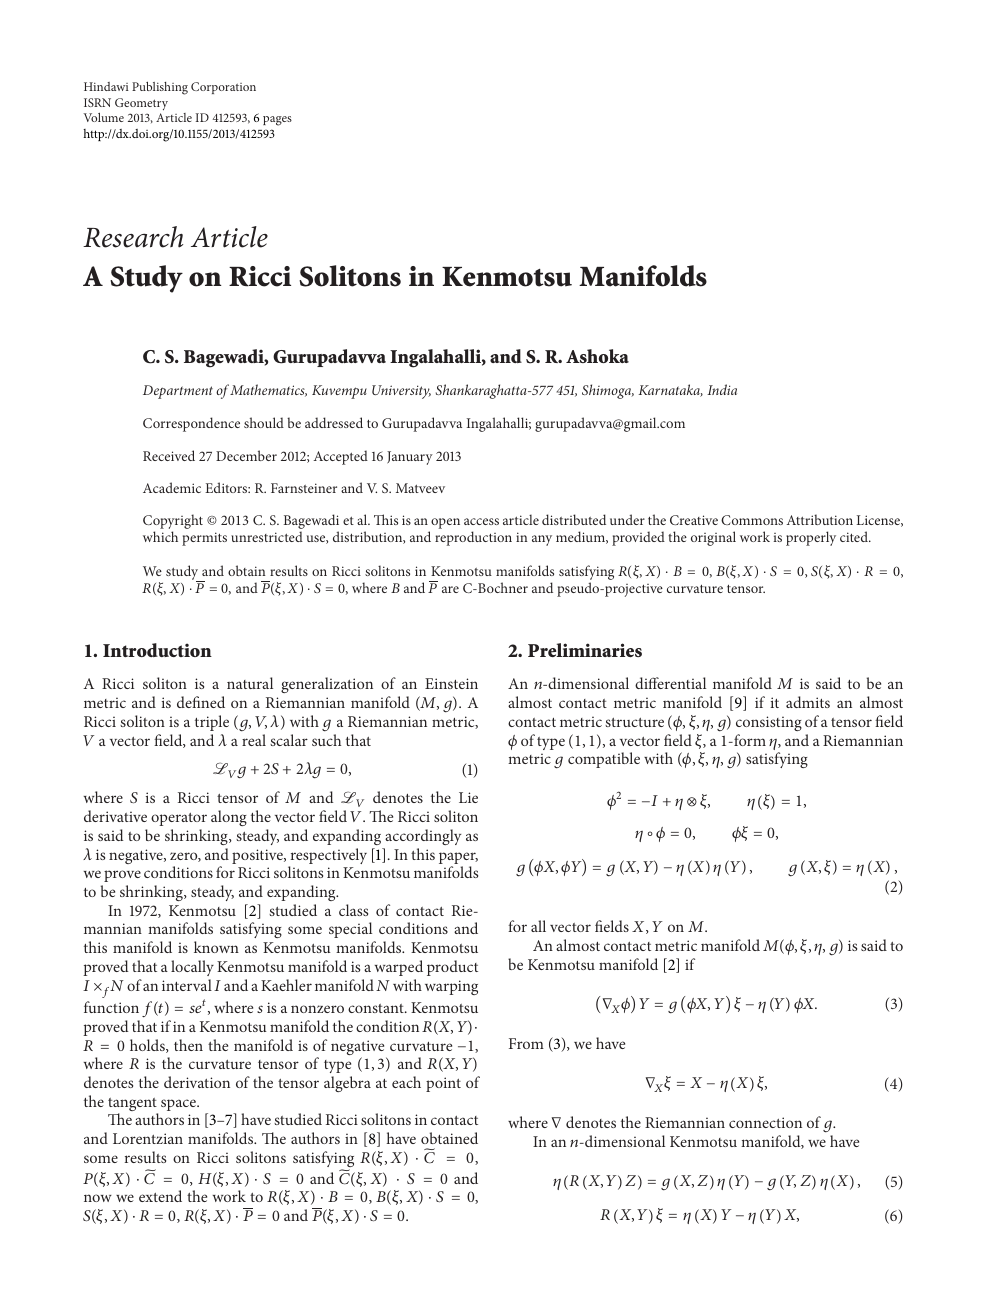 A Study On Ricci Solitons In Kenmotsu Manifolds Topic Of Research Paper In Mathematics Download Scholarly Article Pdf And Read For Free On Cyberleninka Open Science Hub